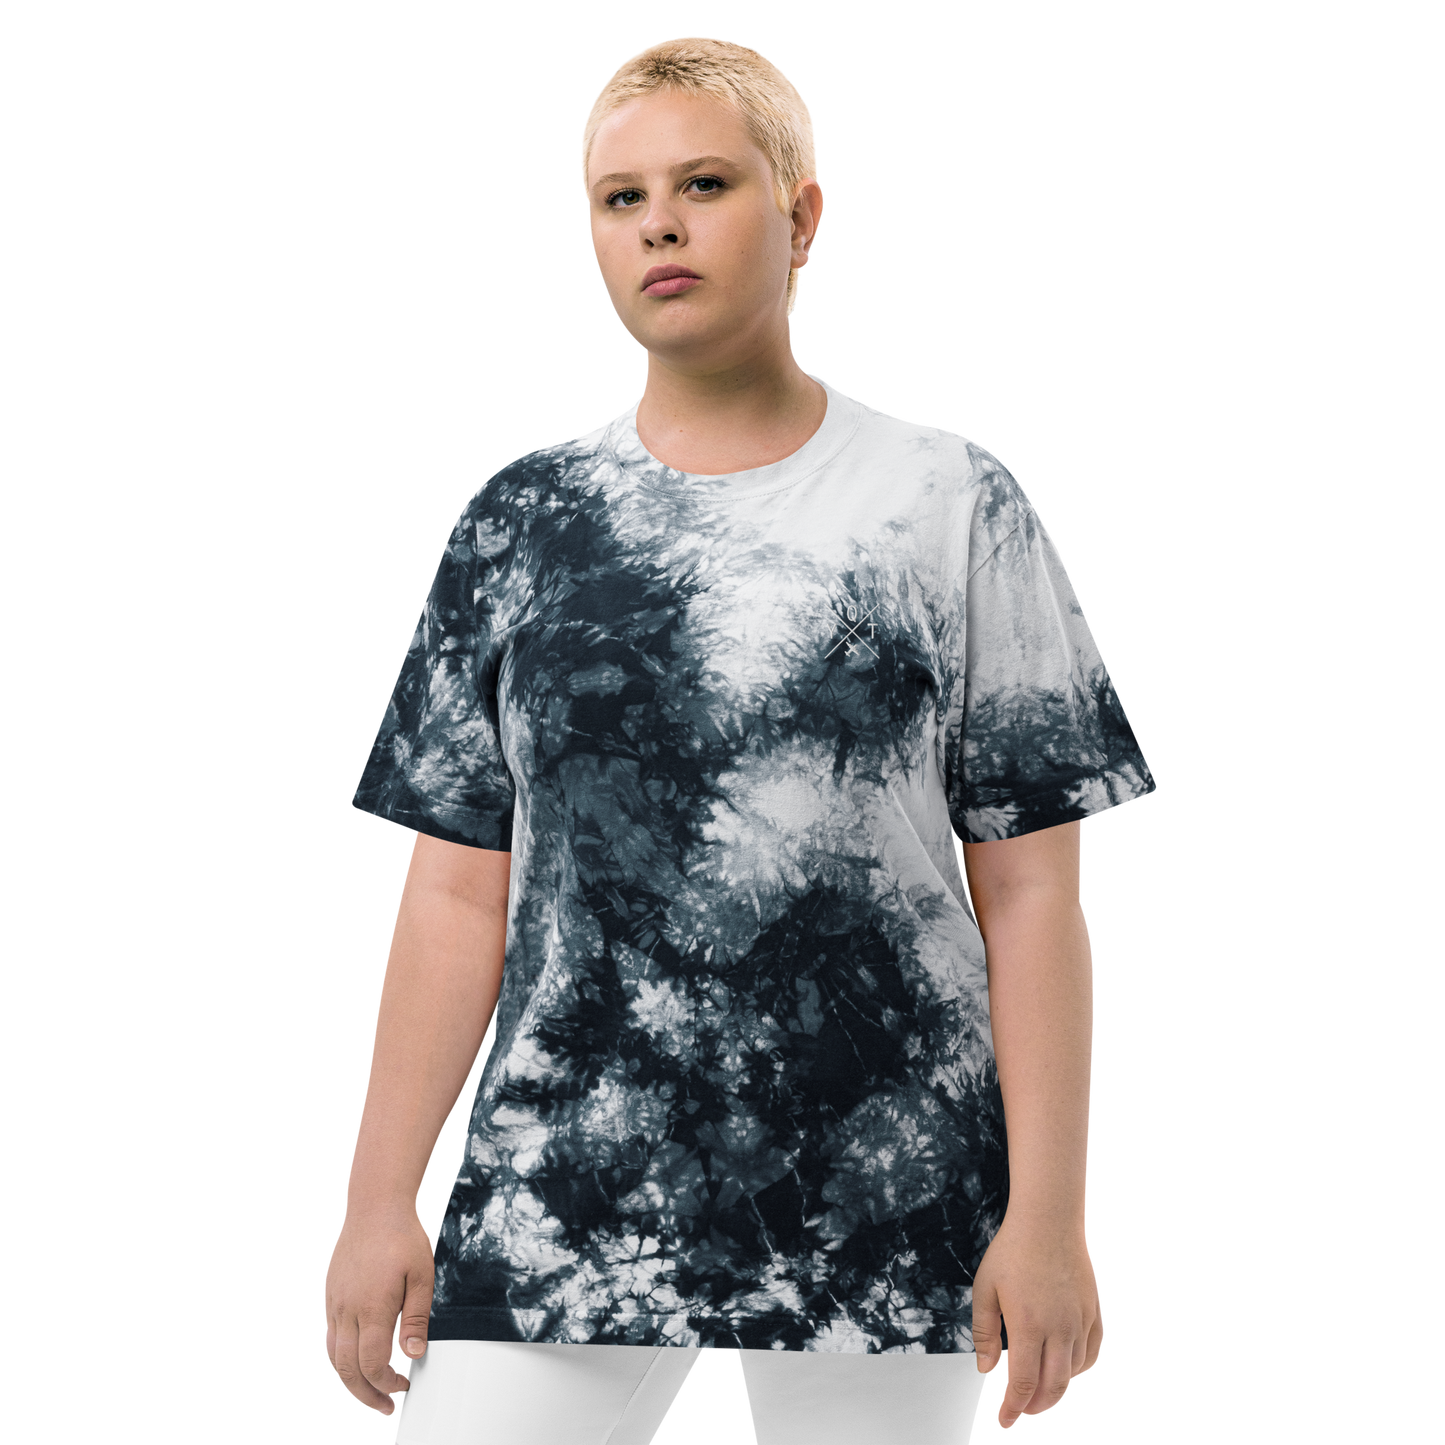 YHM Designs - YQT Thunder Bay Oversized Tie-Dye T-Shirt - Crossed-X Design with Airport Code and Vintage Propliner - White Embroidery - Image 16